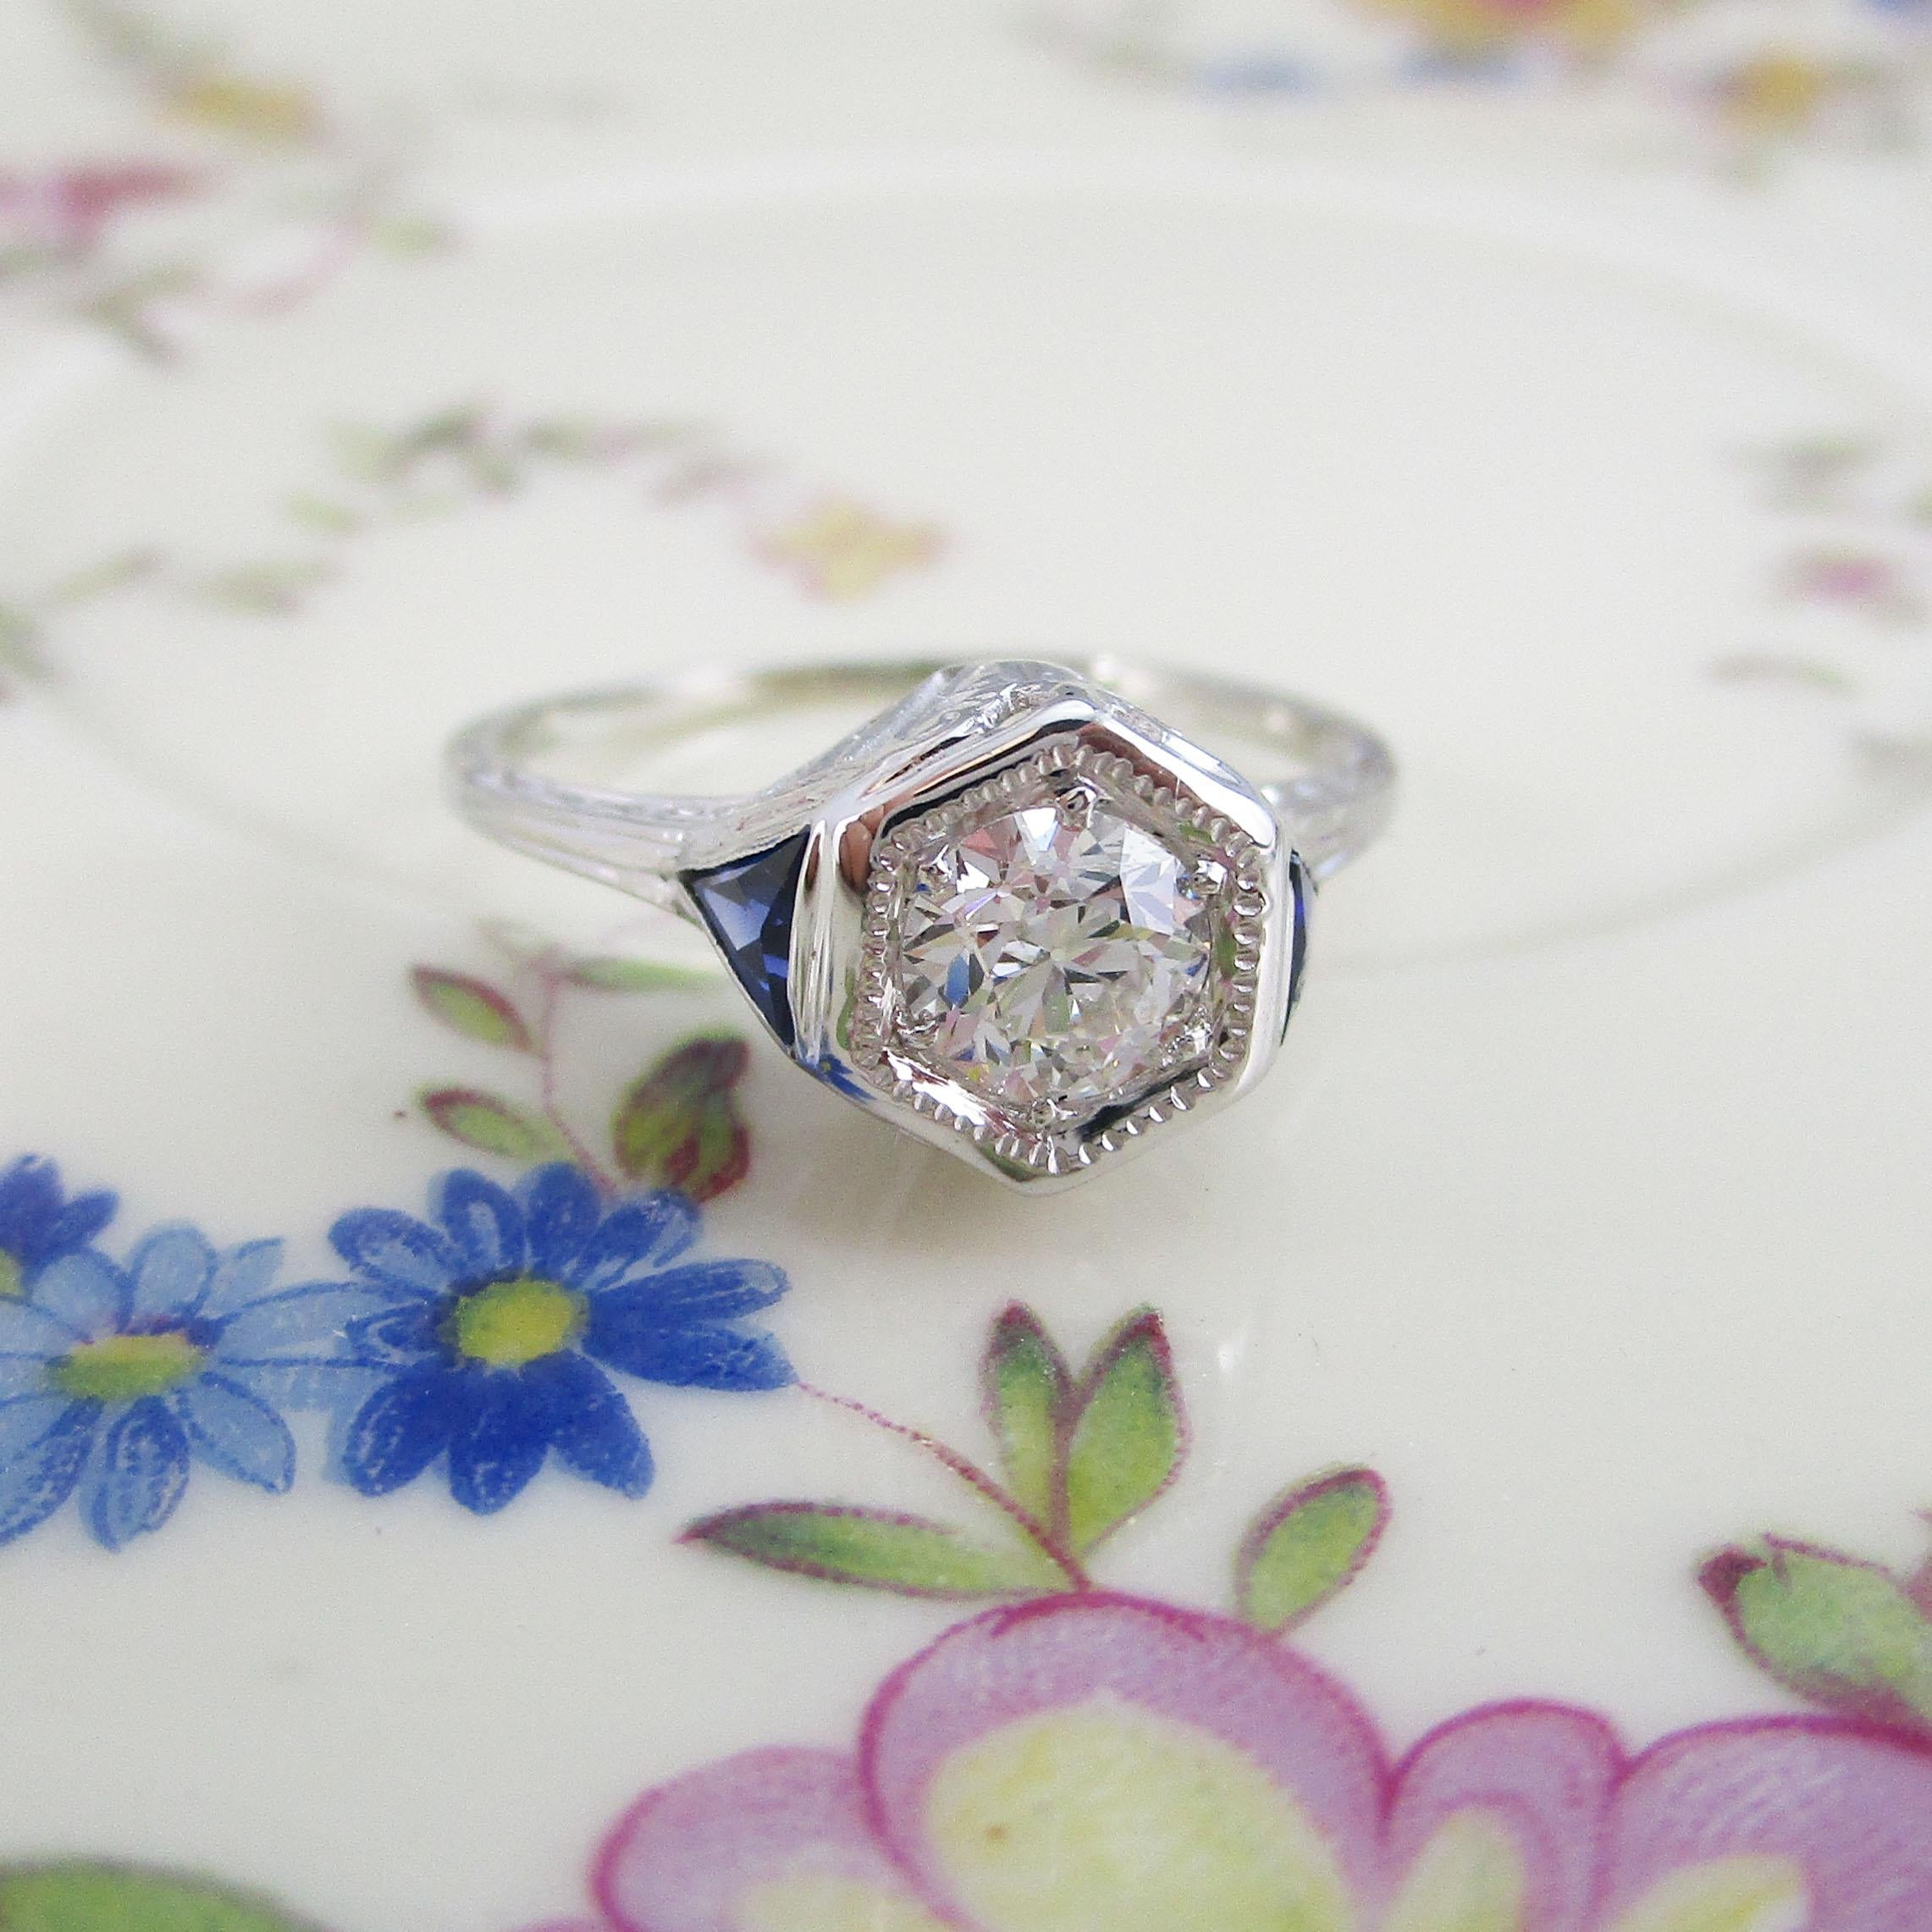 This is a breathtaking original Art Deco engagement ring in 18k white gold with a beautiful old mine cut diamond center flanked by two beautiful blue sapphires!! This ring has a few of the classic hallmarks of Art Deco - an elegant raised head, a